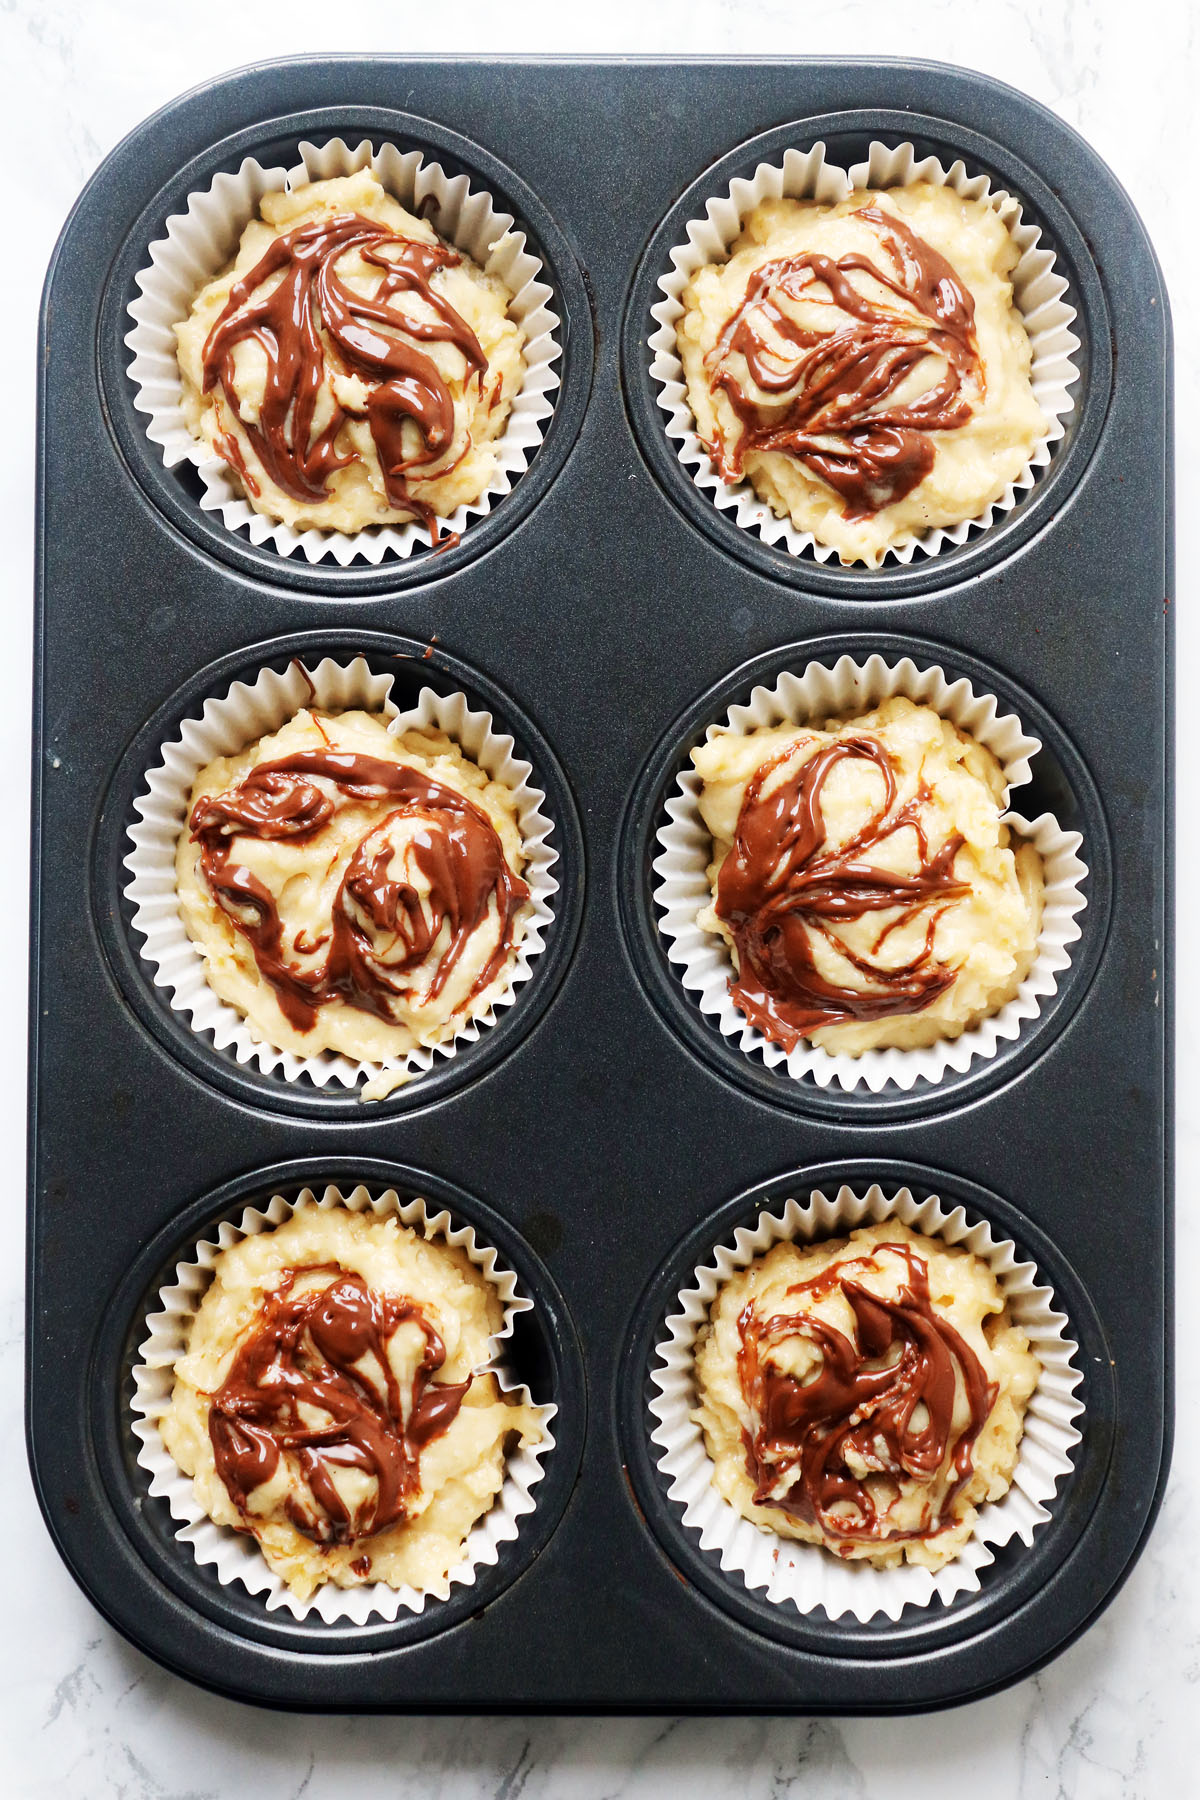 These Nutella Stuffed Muffins are the perfect way to celebrate Wolrd Nutella Day. Get the recipe at Supper in the Suburbs!